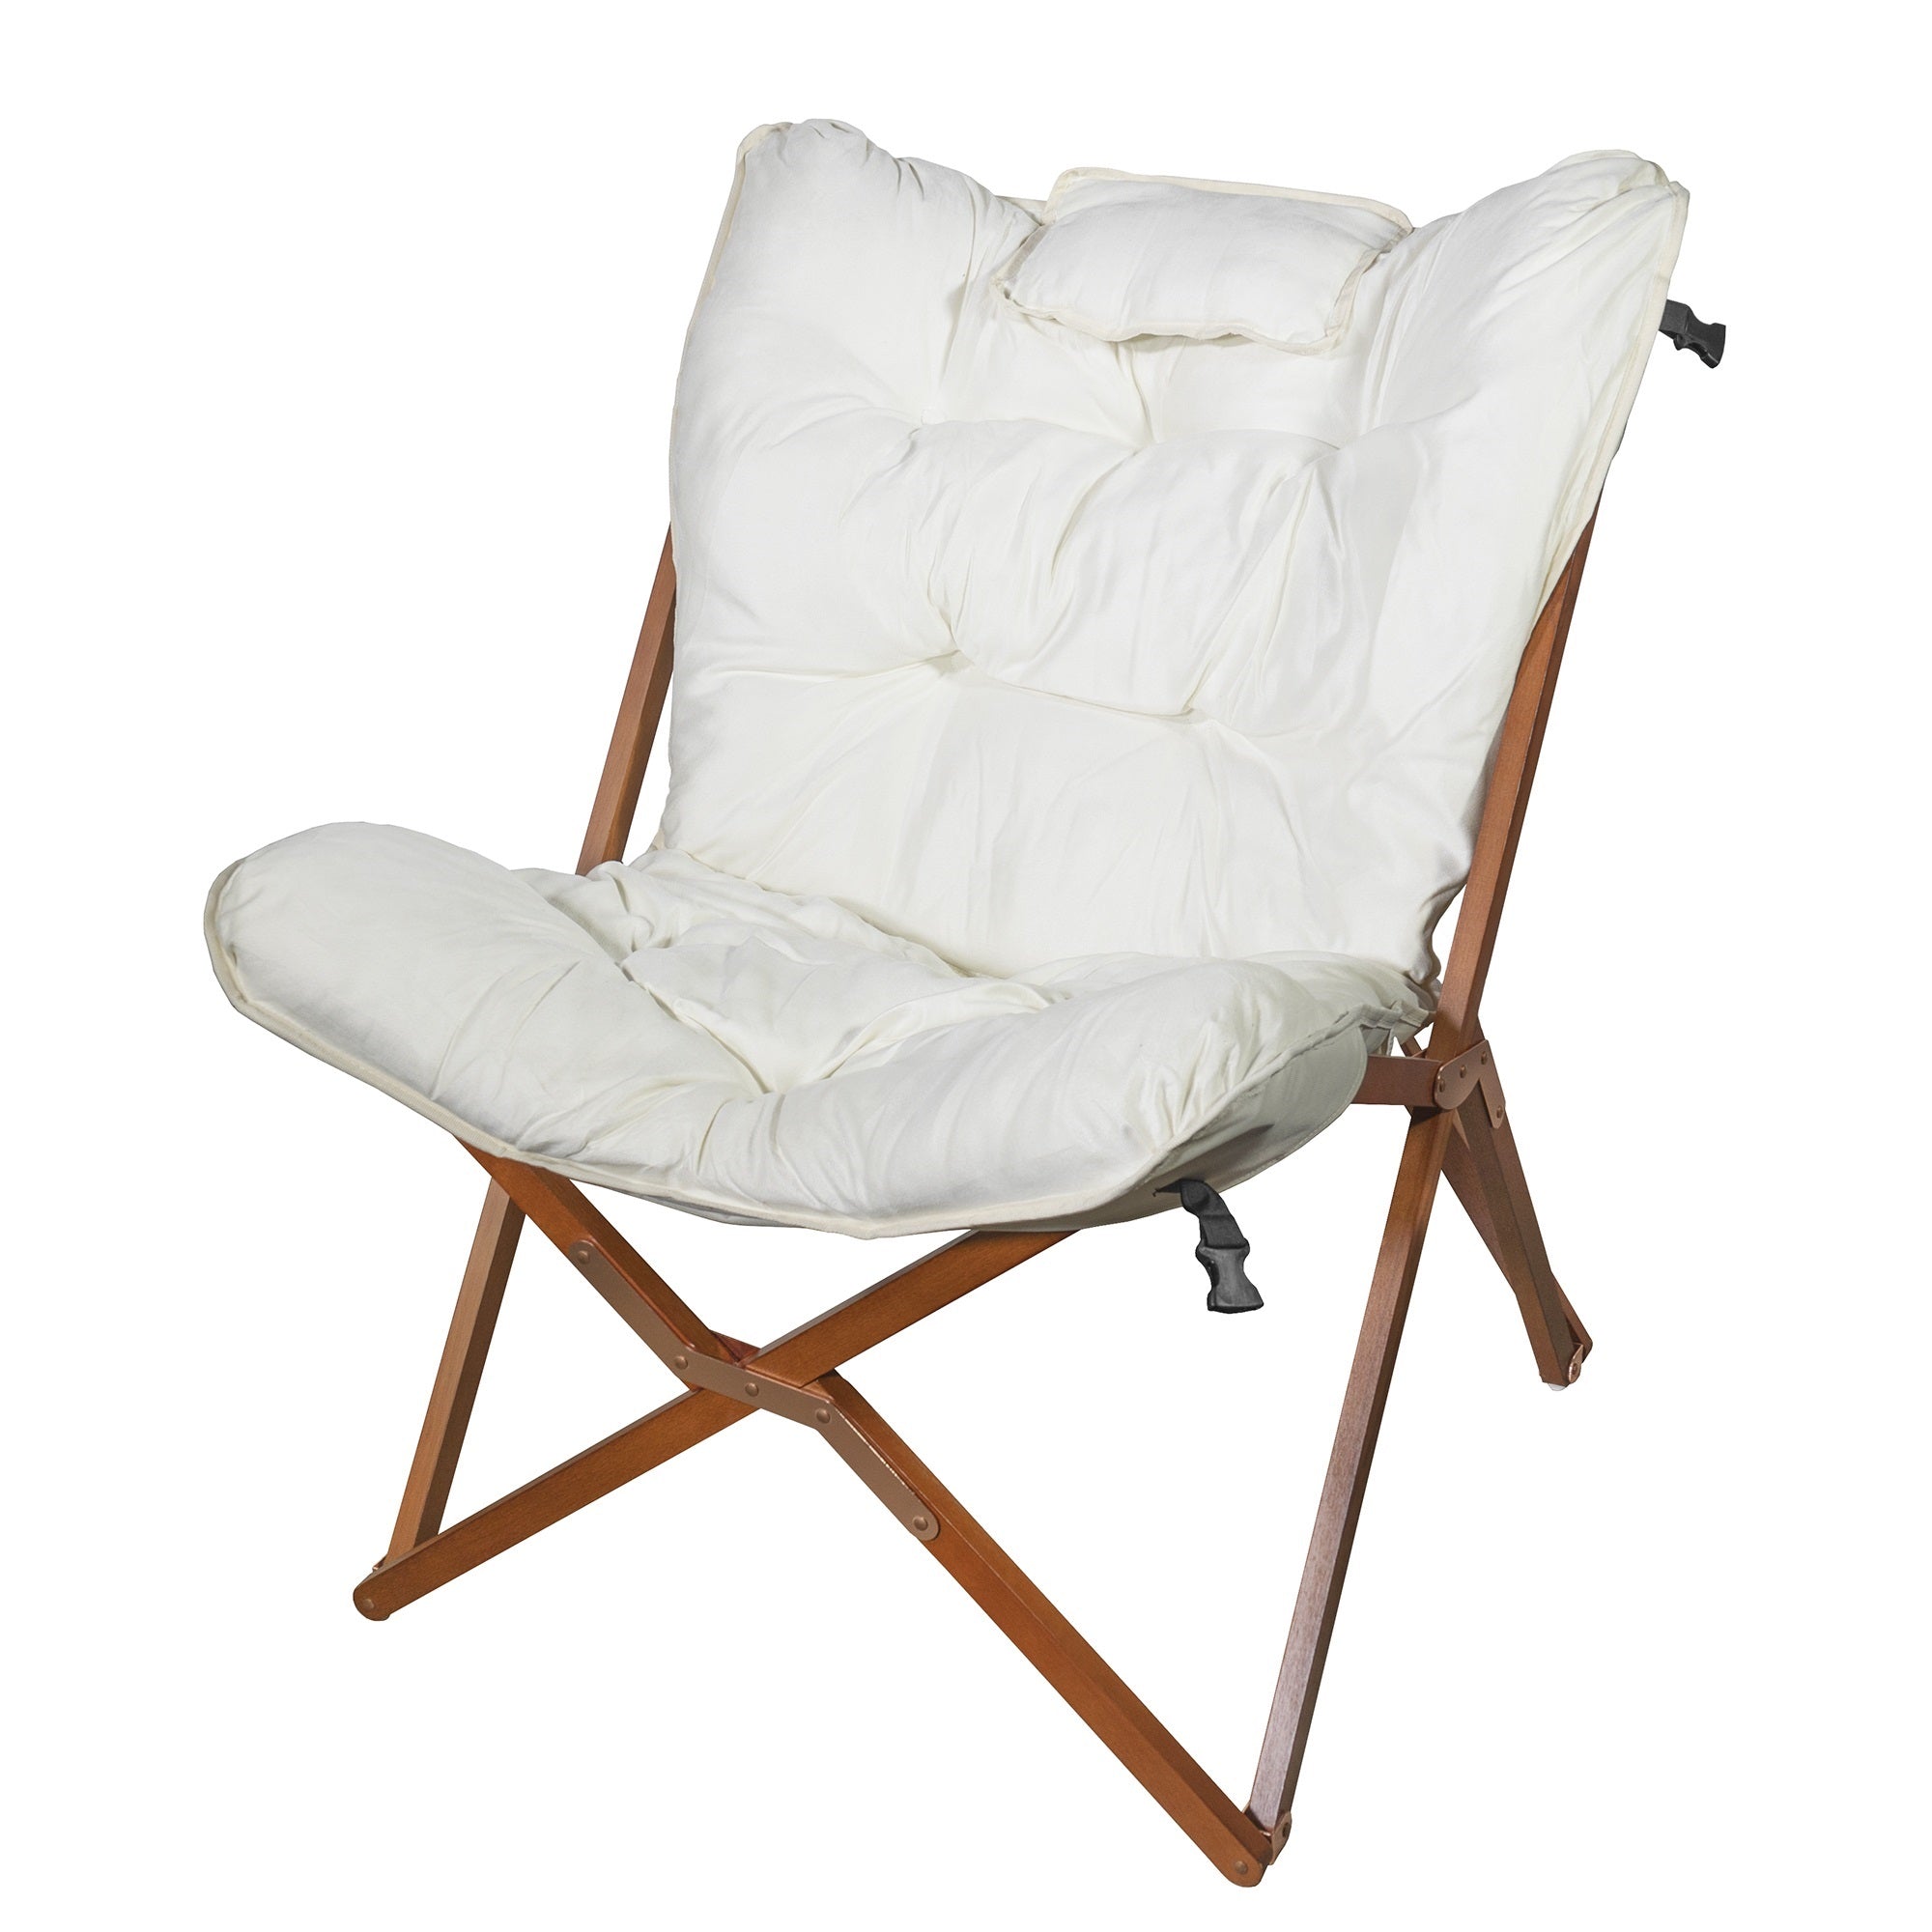 Zenithen Indoor Wood Butterfly Folding Accent Chair For Dorms, Bedrooms, and Living Rooms